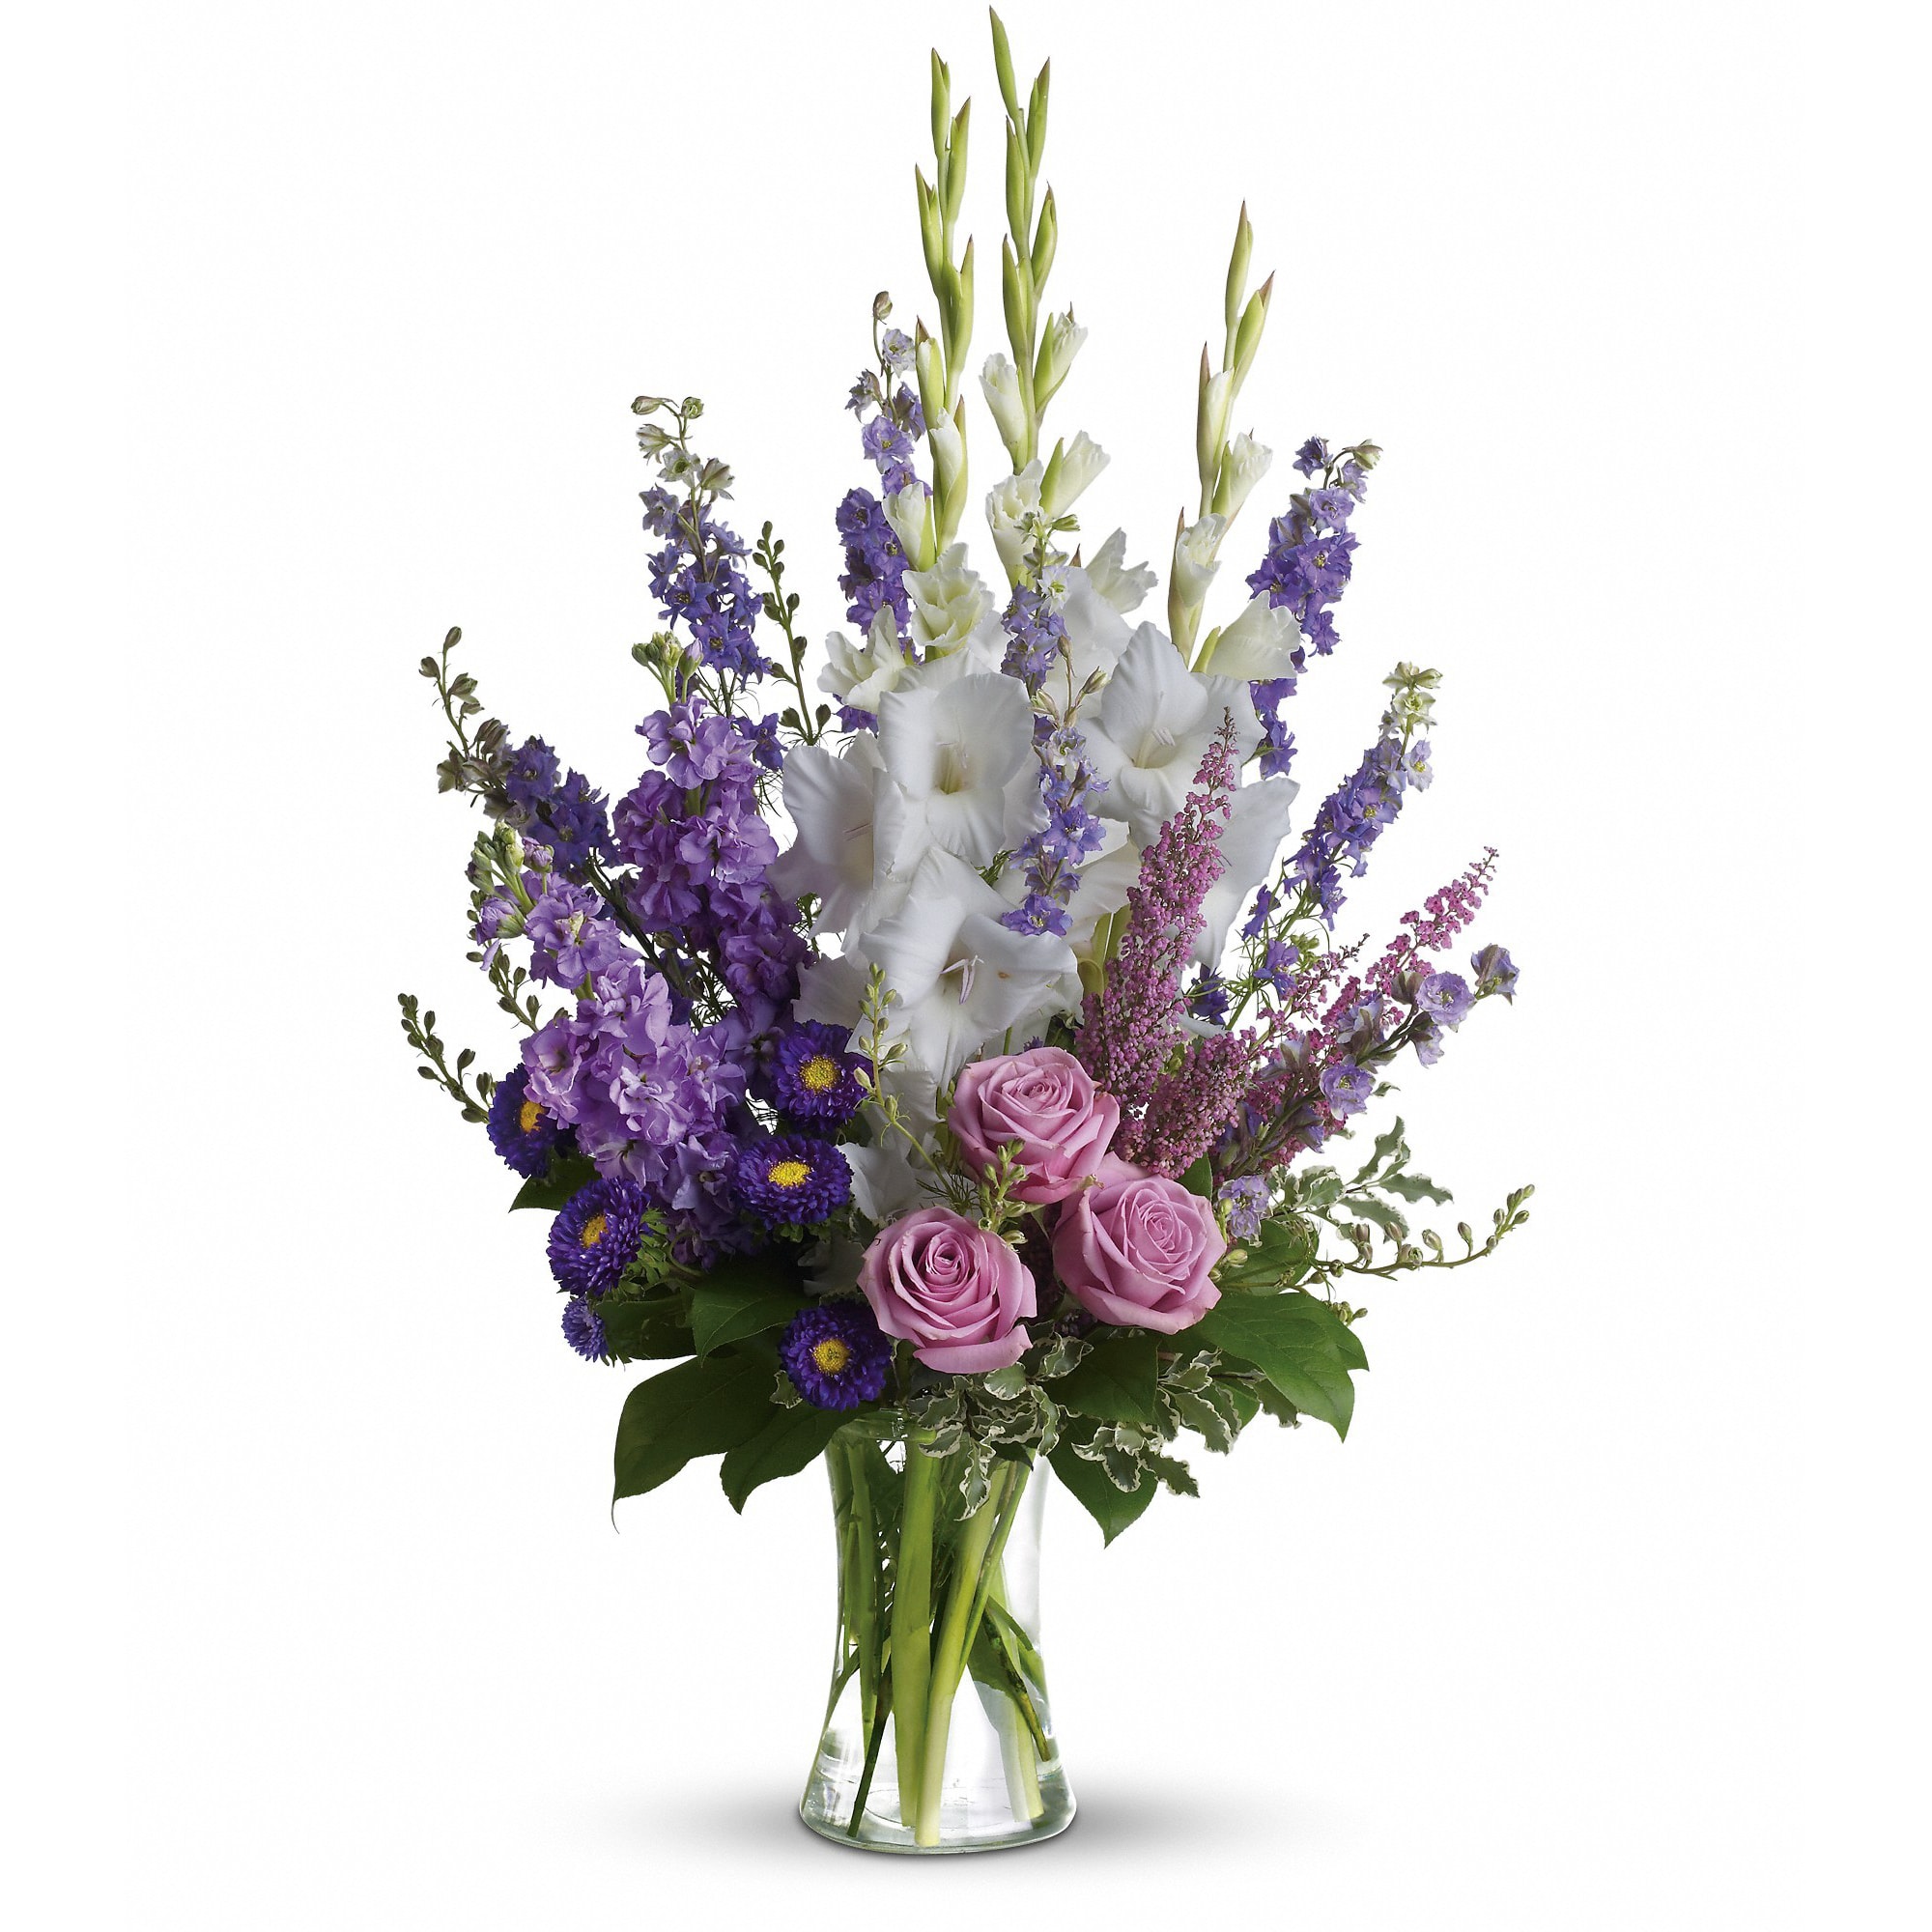 ***Must Be 3 Days NOTICE***Joyful Memory by Teleflora - ***Must Be 3 Days NOTICE***  Lavender and white sympathy flowers make a grand statement in this joyful bouquet. Cherish your memories with this lasting remembrance of lavender larkspur and roses, deep purple asters, pure white gladioli and the softest pink heather. 